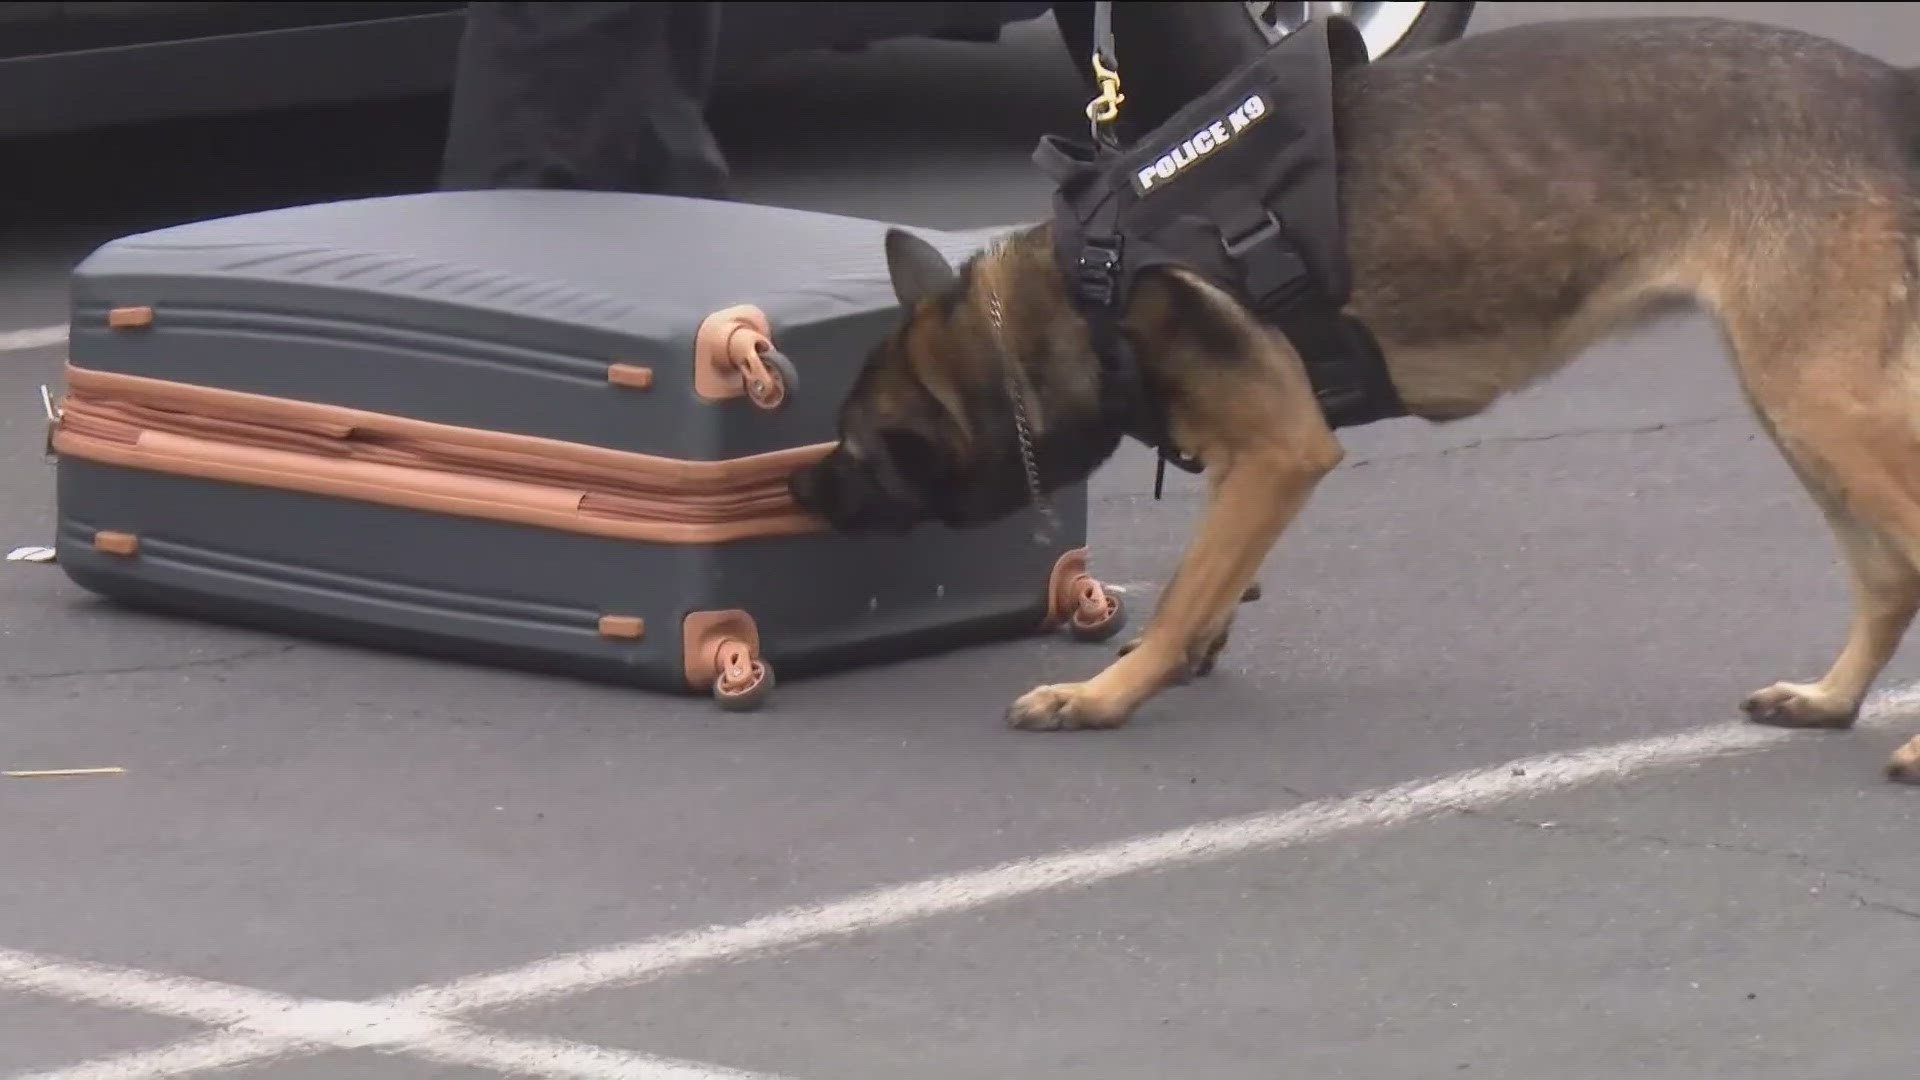 San Diego police against proposed AB 742; would restrict the use of k9s